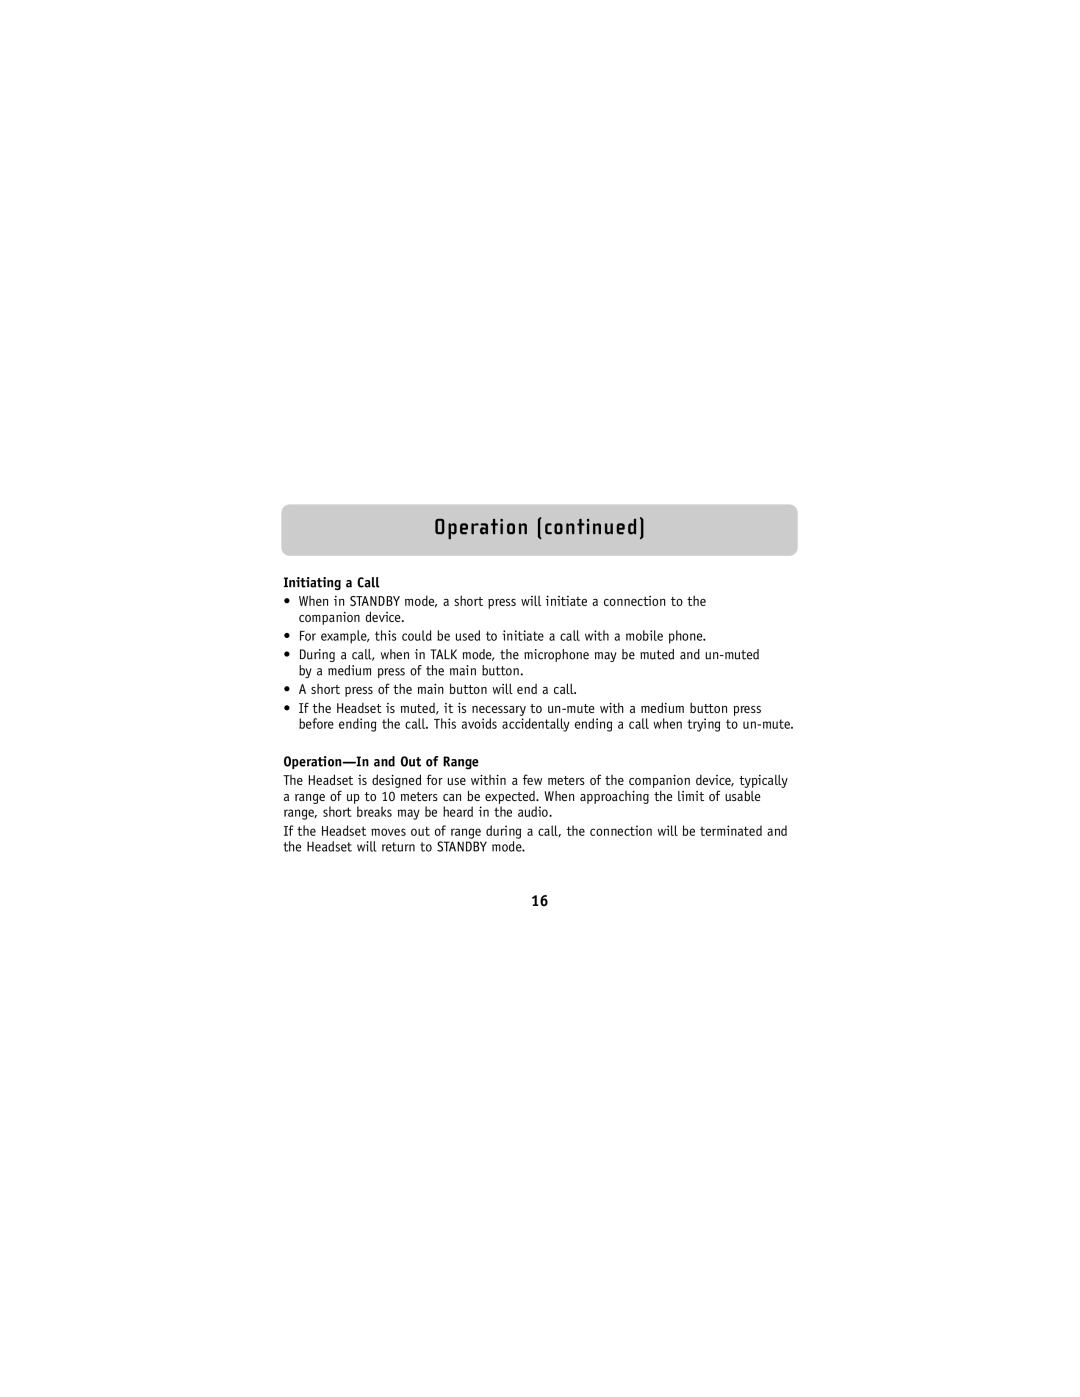 Belkin F8V9017 user manual Initiating a Call, Operation-Inand Out of Range, Operation continued 